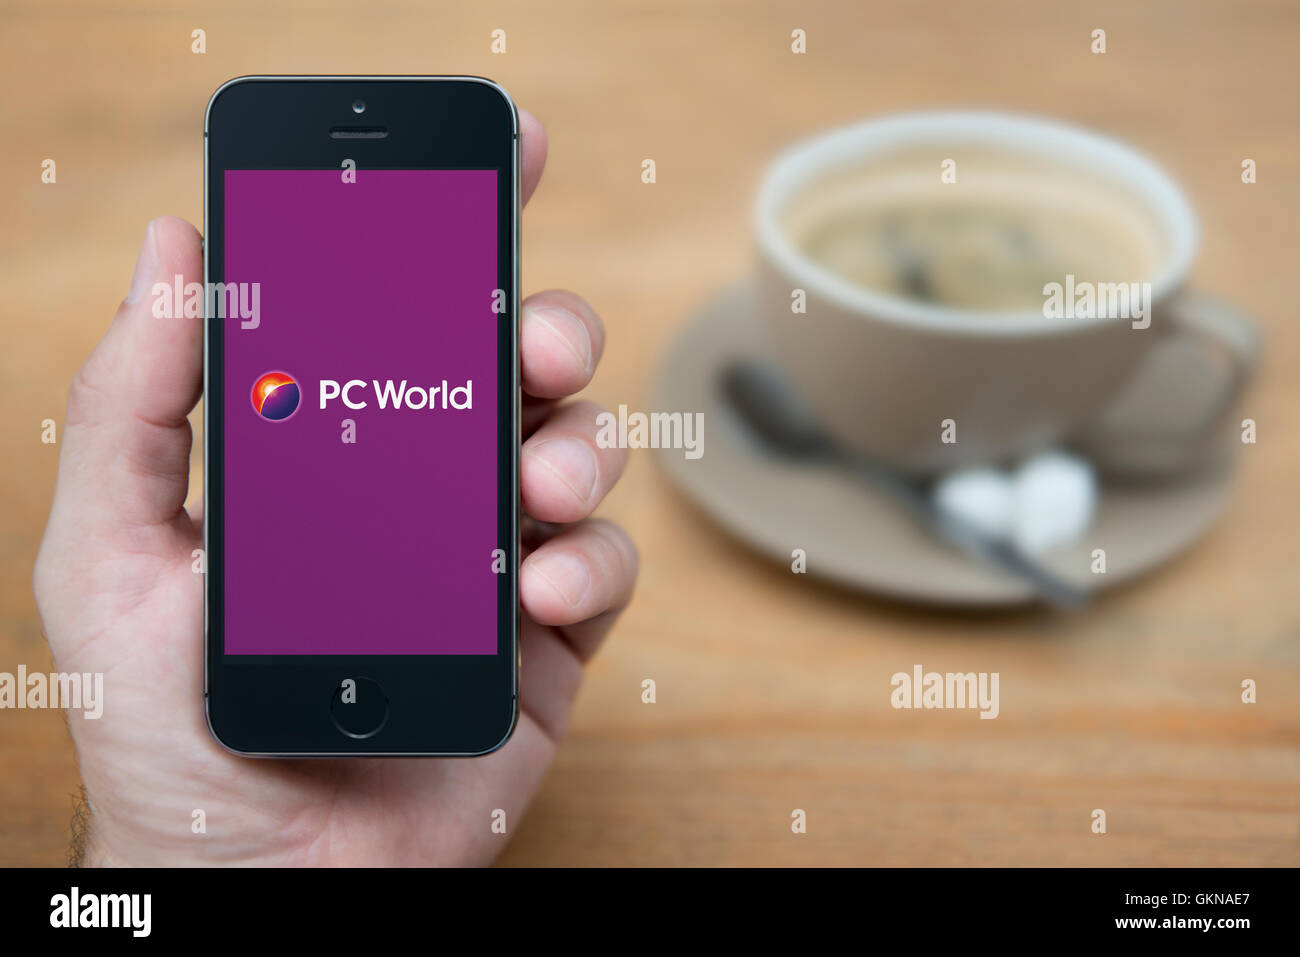 A man looks at his iPhone which displays the PC World logo, while sat with a cup of coffee (Editorial use only). Stock Photo